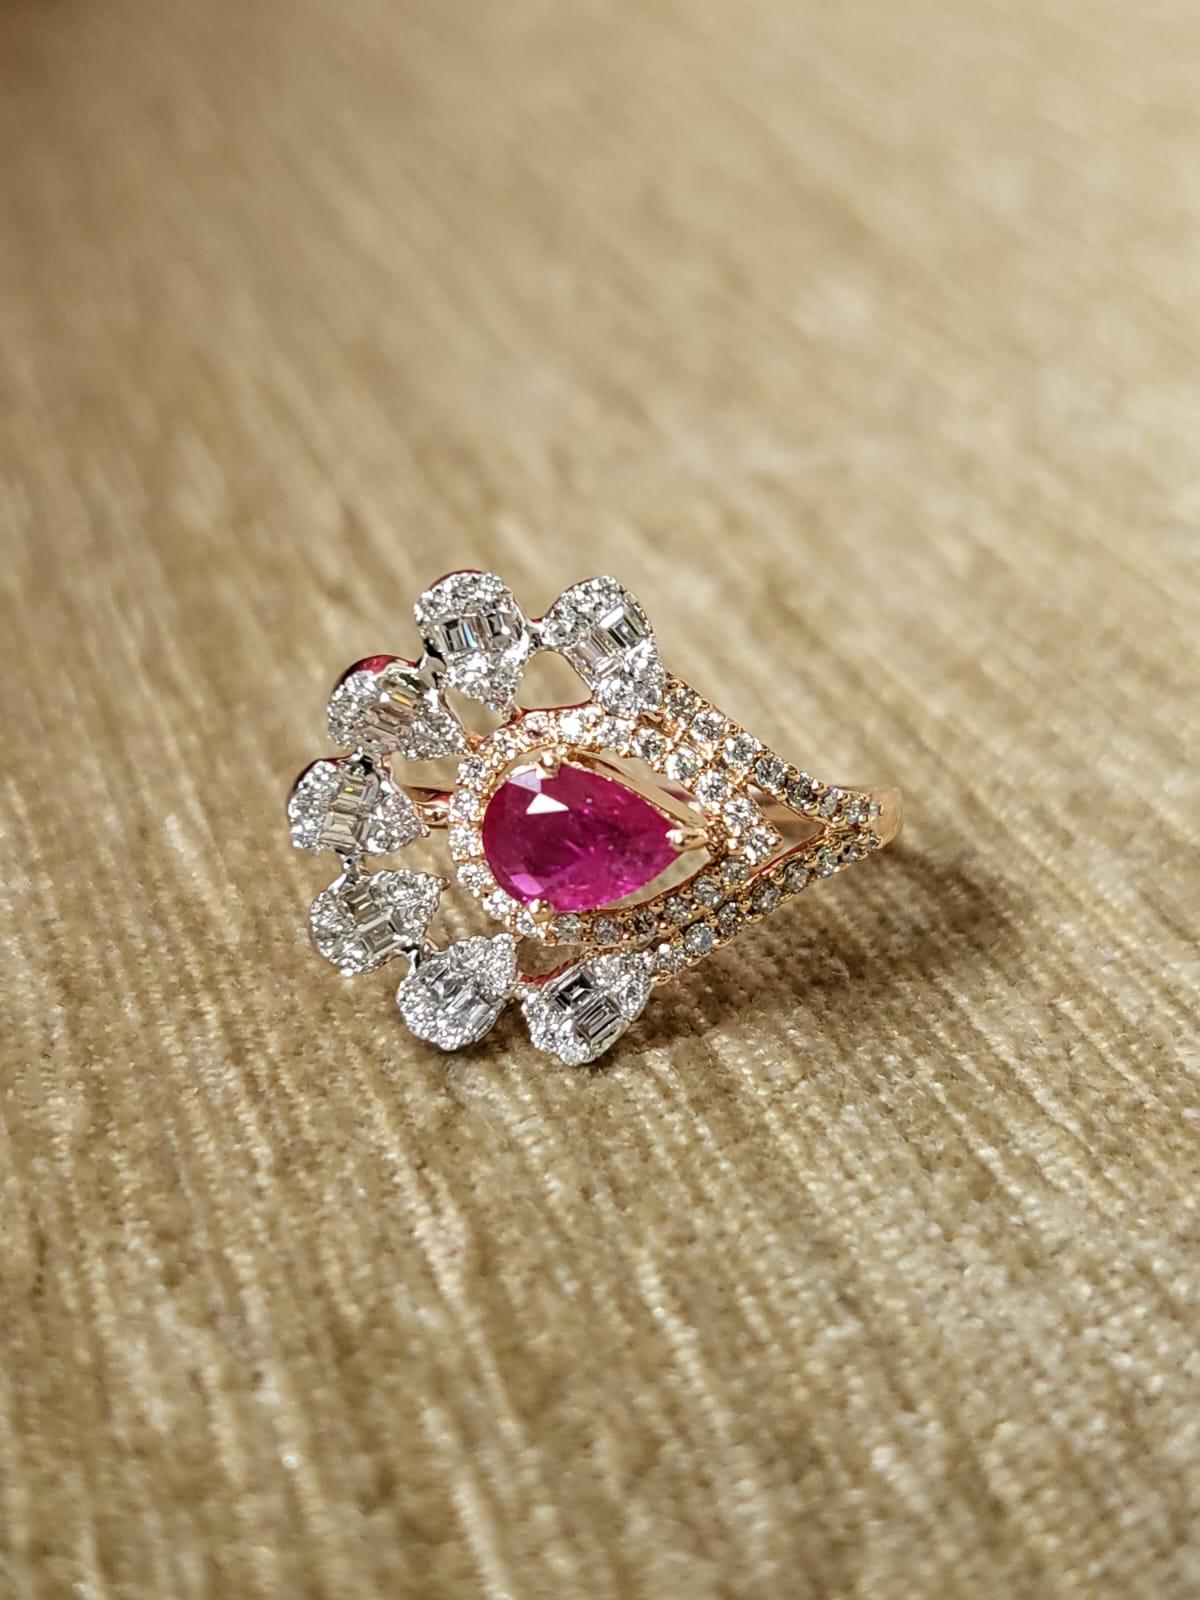 A very gorgeous and one of a kind, Ruby Cocktail/ Engagement Ring set in 18K Rose Gold & Diamonds. The weight of the Ruby is 0.64 carats. The Ruby is completely natural, without any treatment and is of Mozambique origin. The weight of the Diamonds